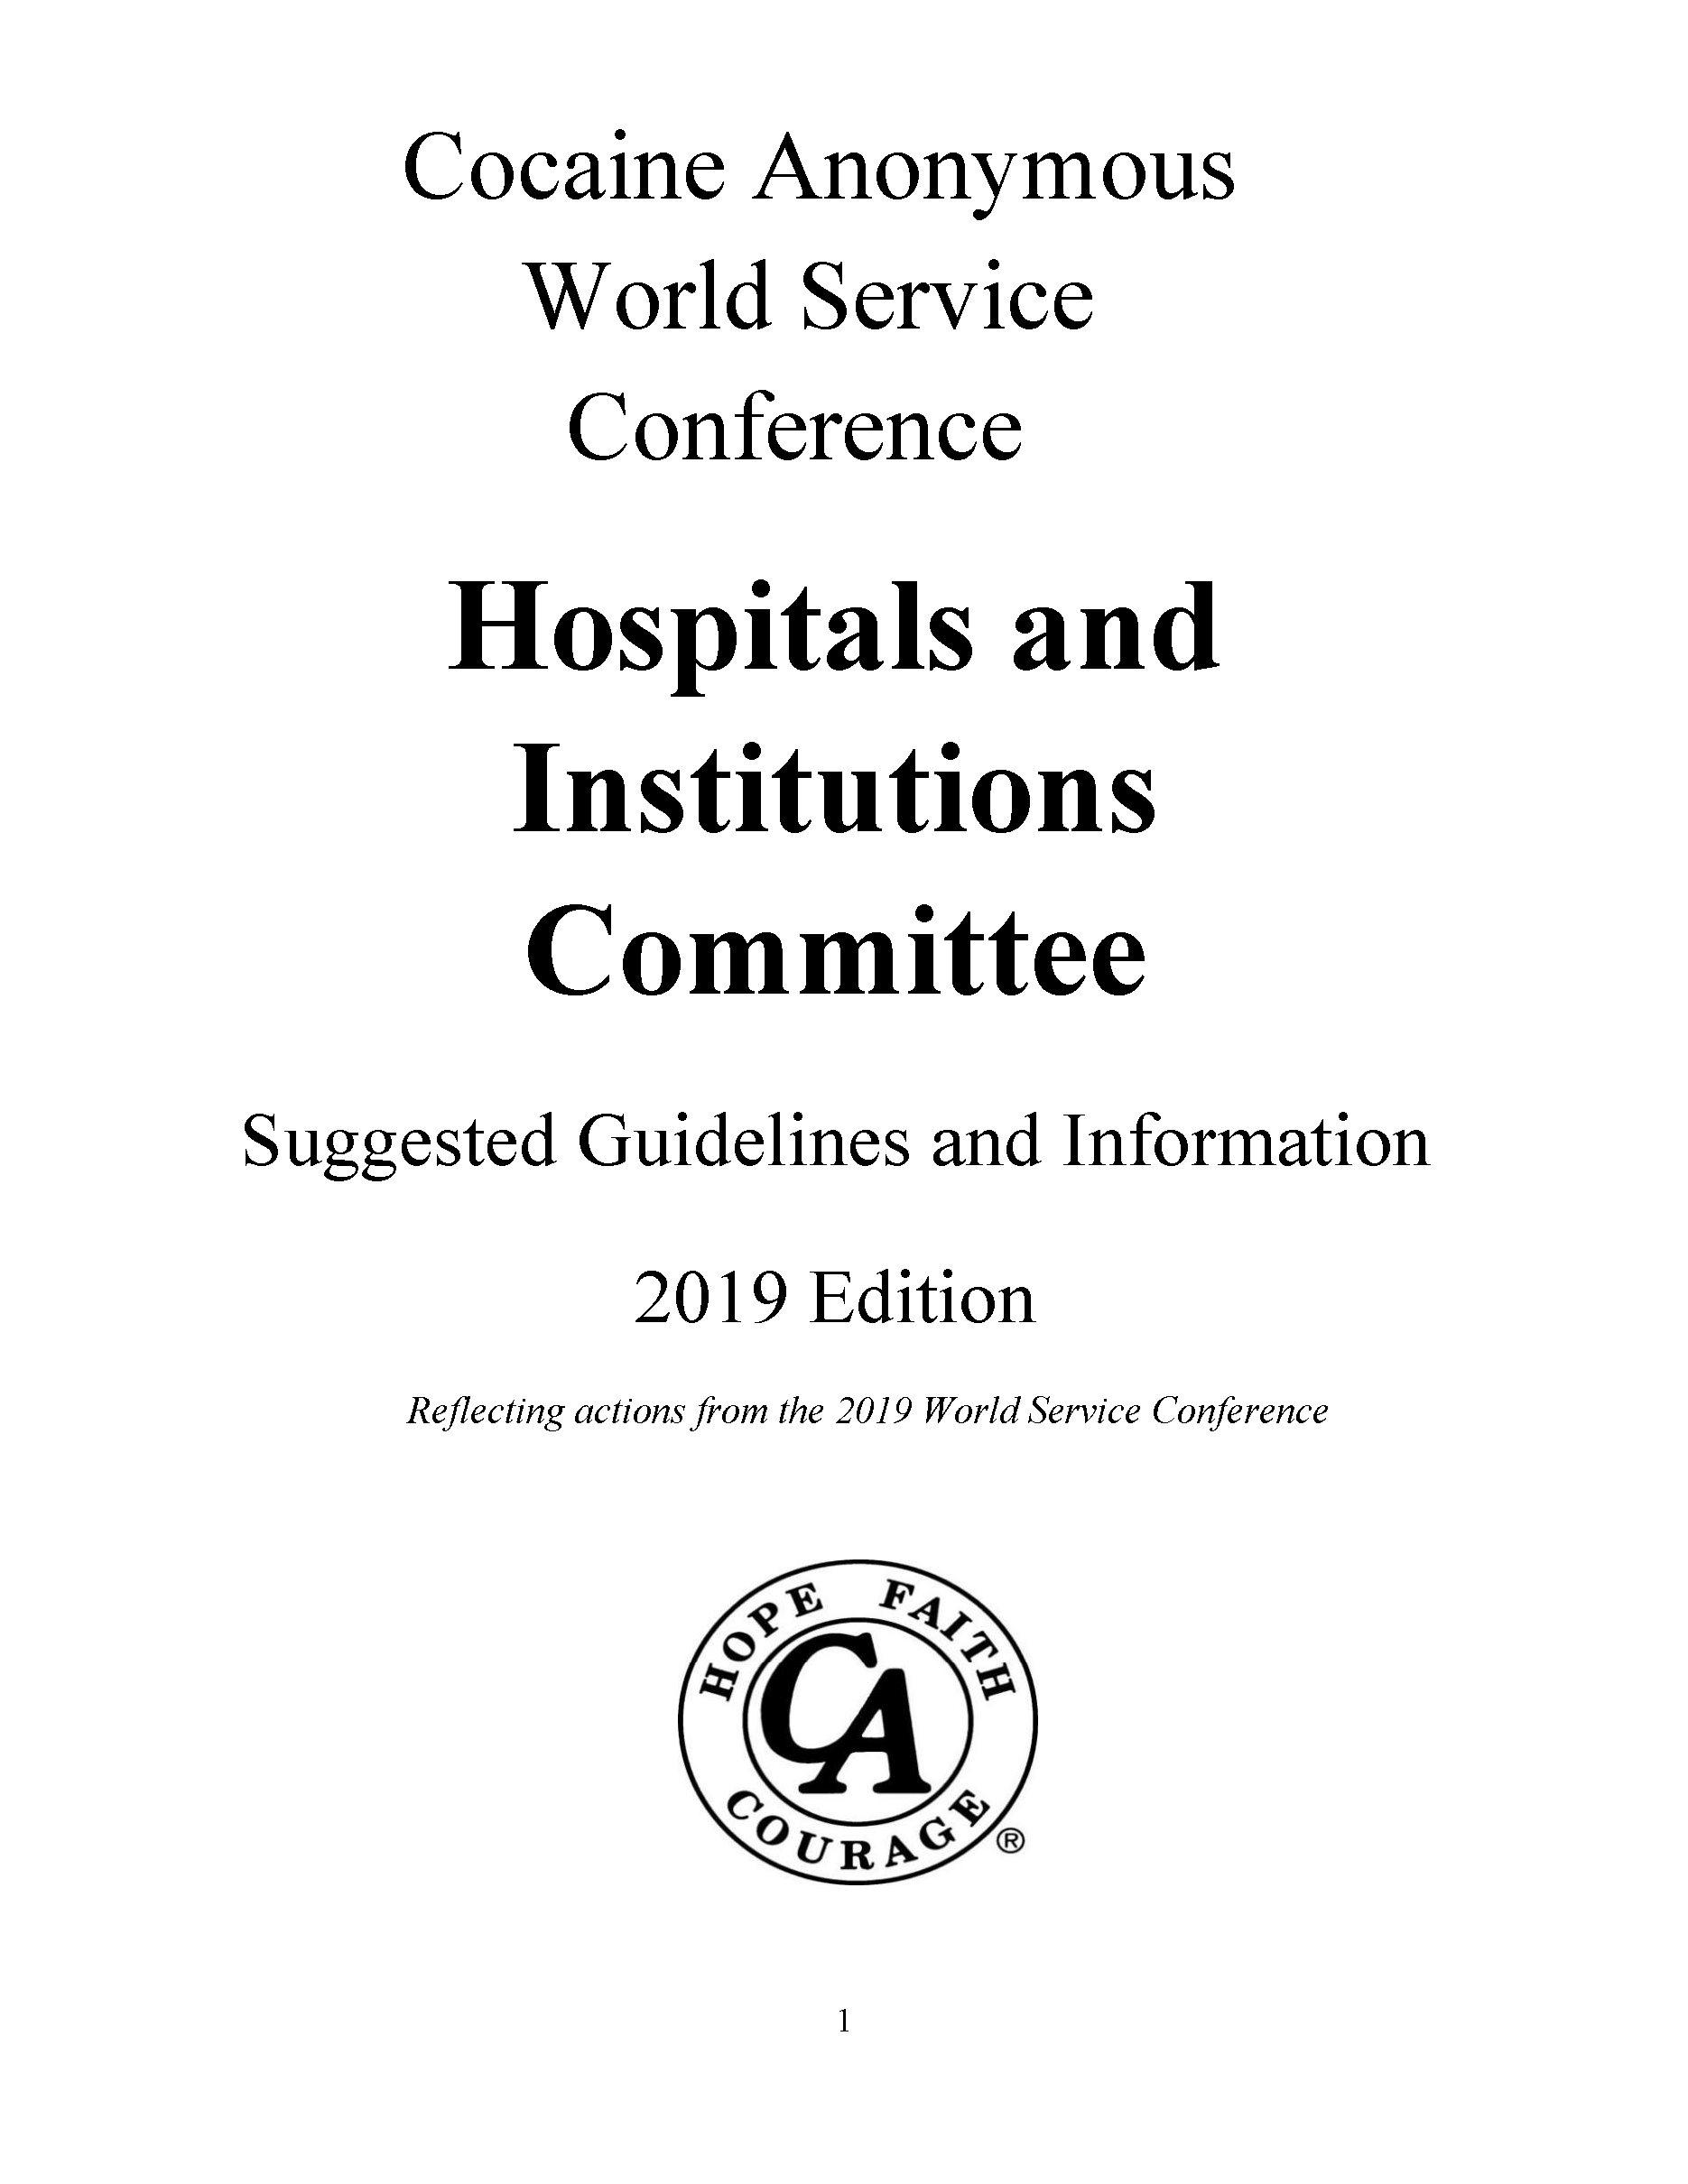 WSC-Hospitals-Institutions-Committee-Guidelines-2018-2019.png